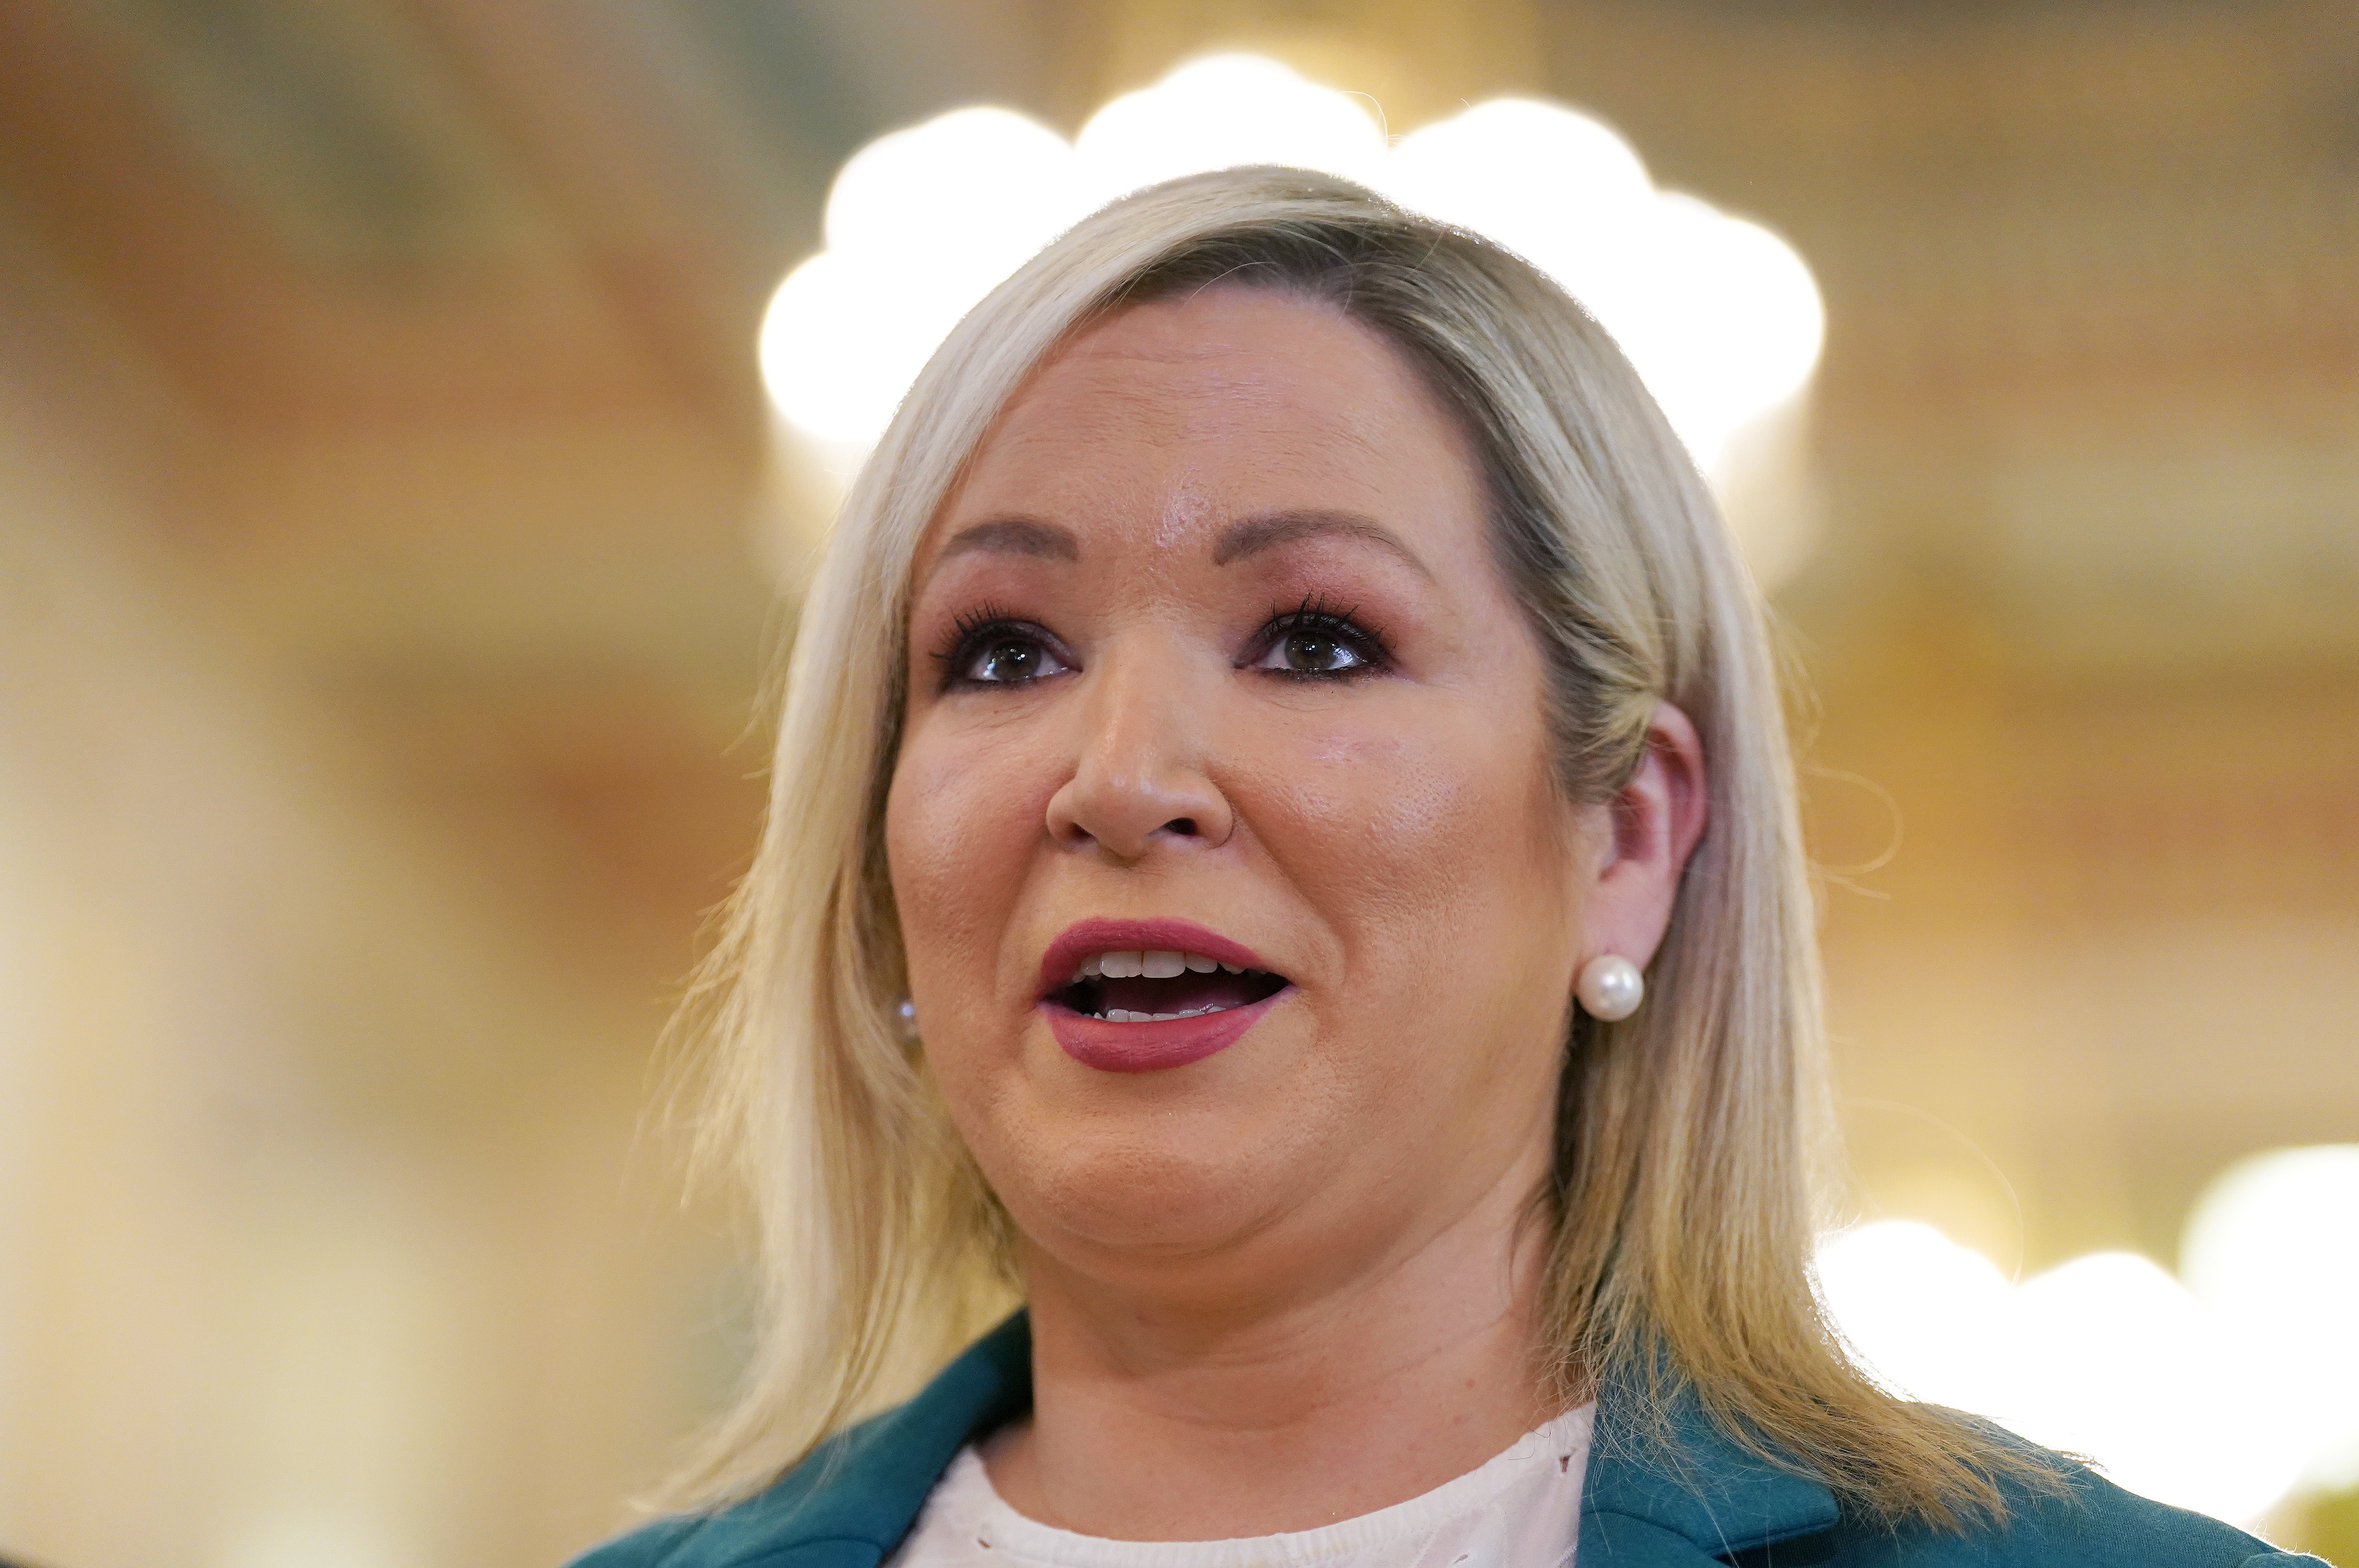 Sinn Fein vice president Michelle O’Neill has said the devolved powersharing institutions at Stormont should be restored (Brian Lawless/PA)